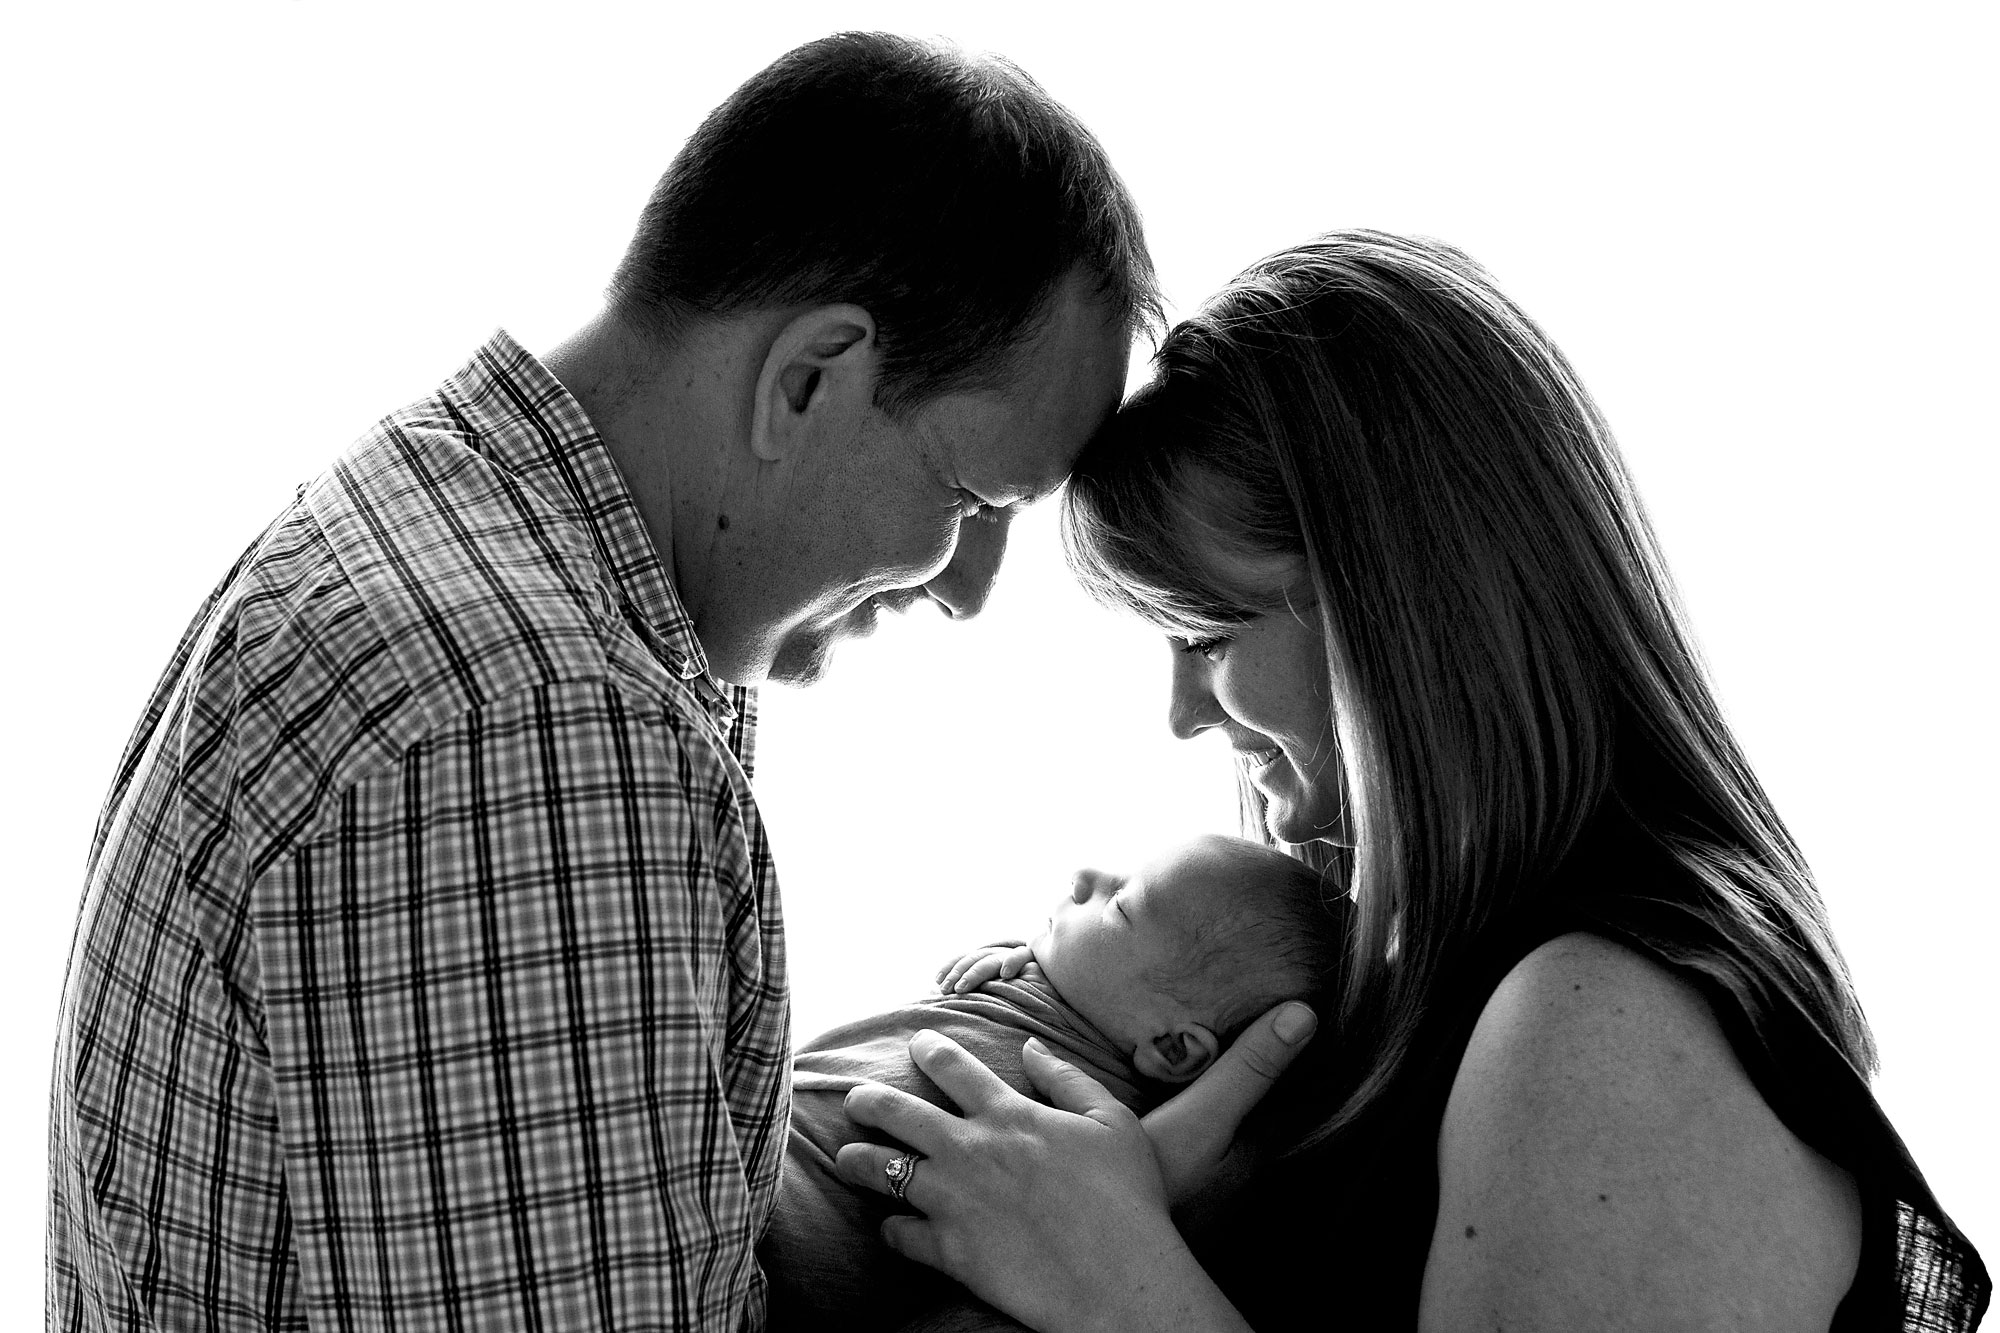 newborn and family photography new jersey, black and white image of parents touching foreheads while holding new baby